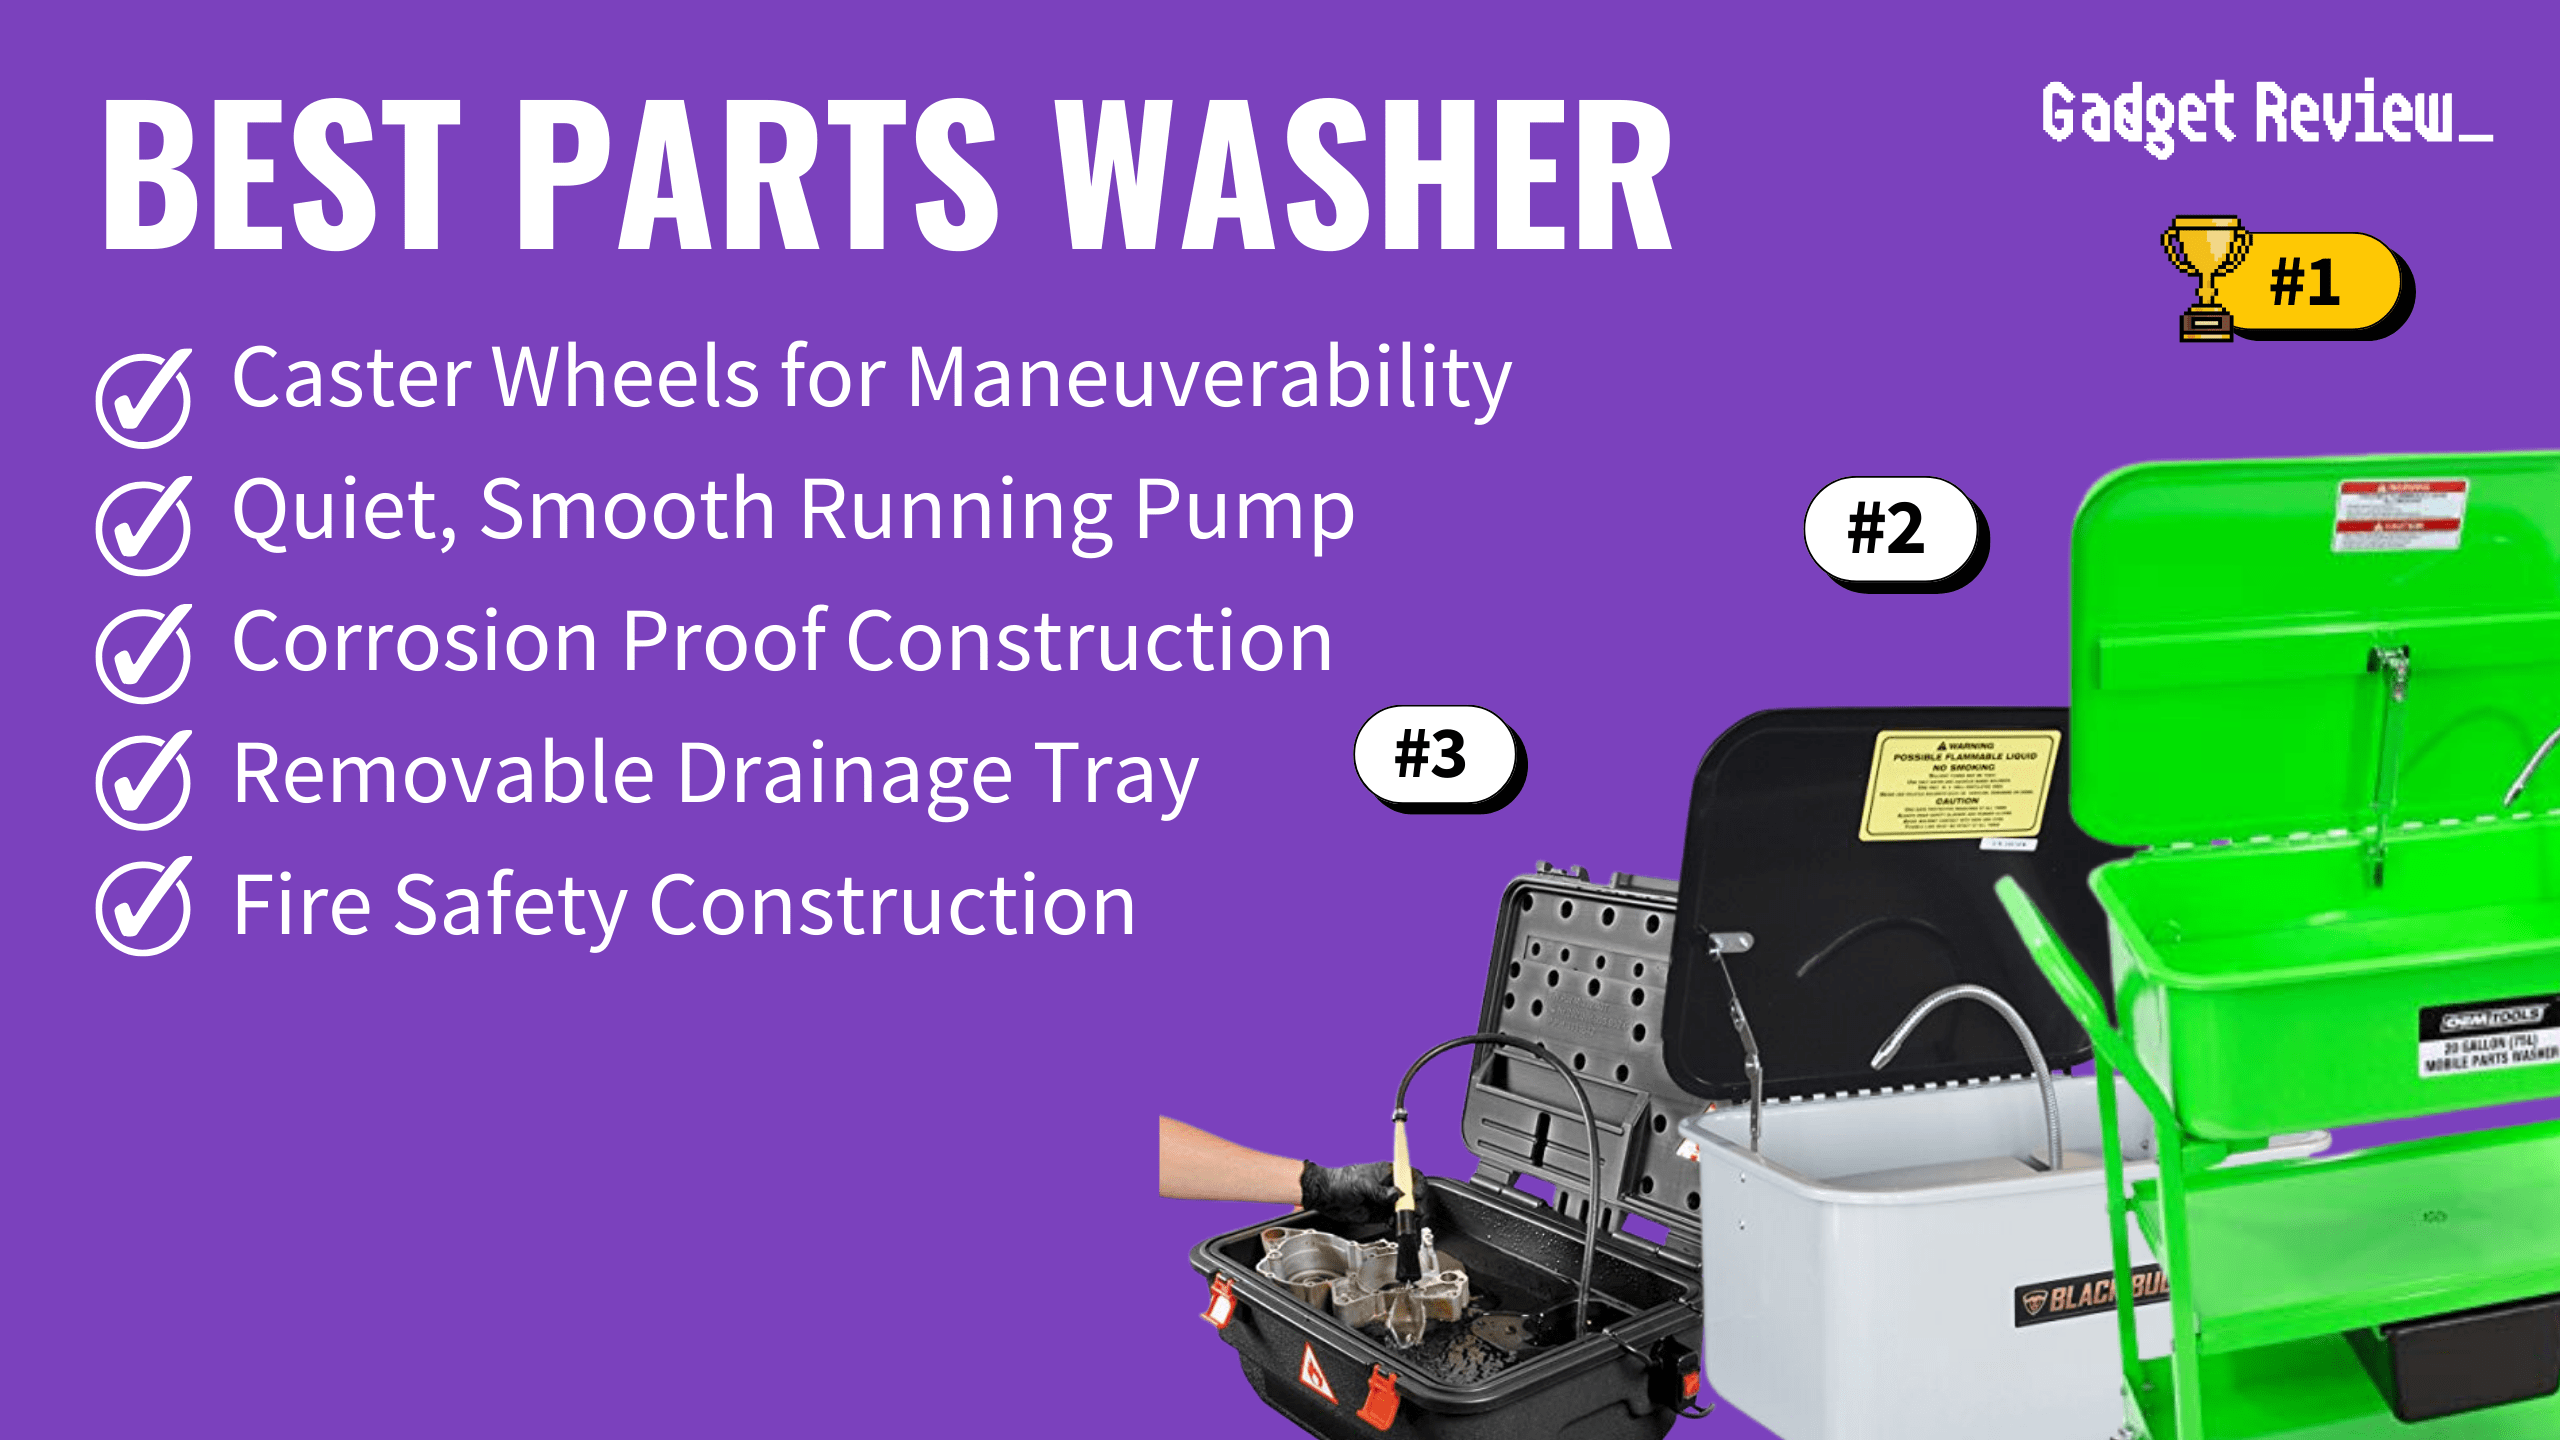 best parts washer featured image that shows the top three best tool models